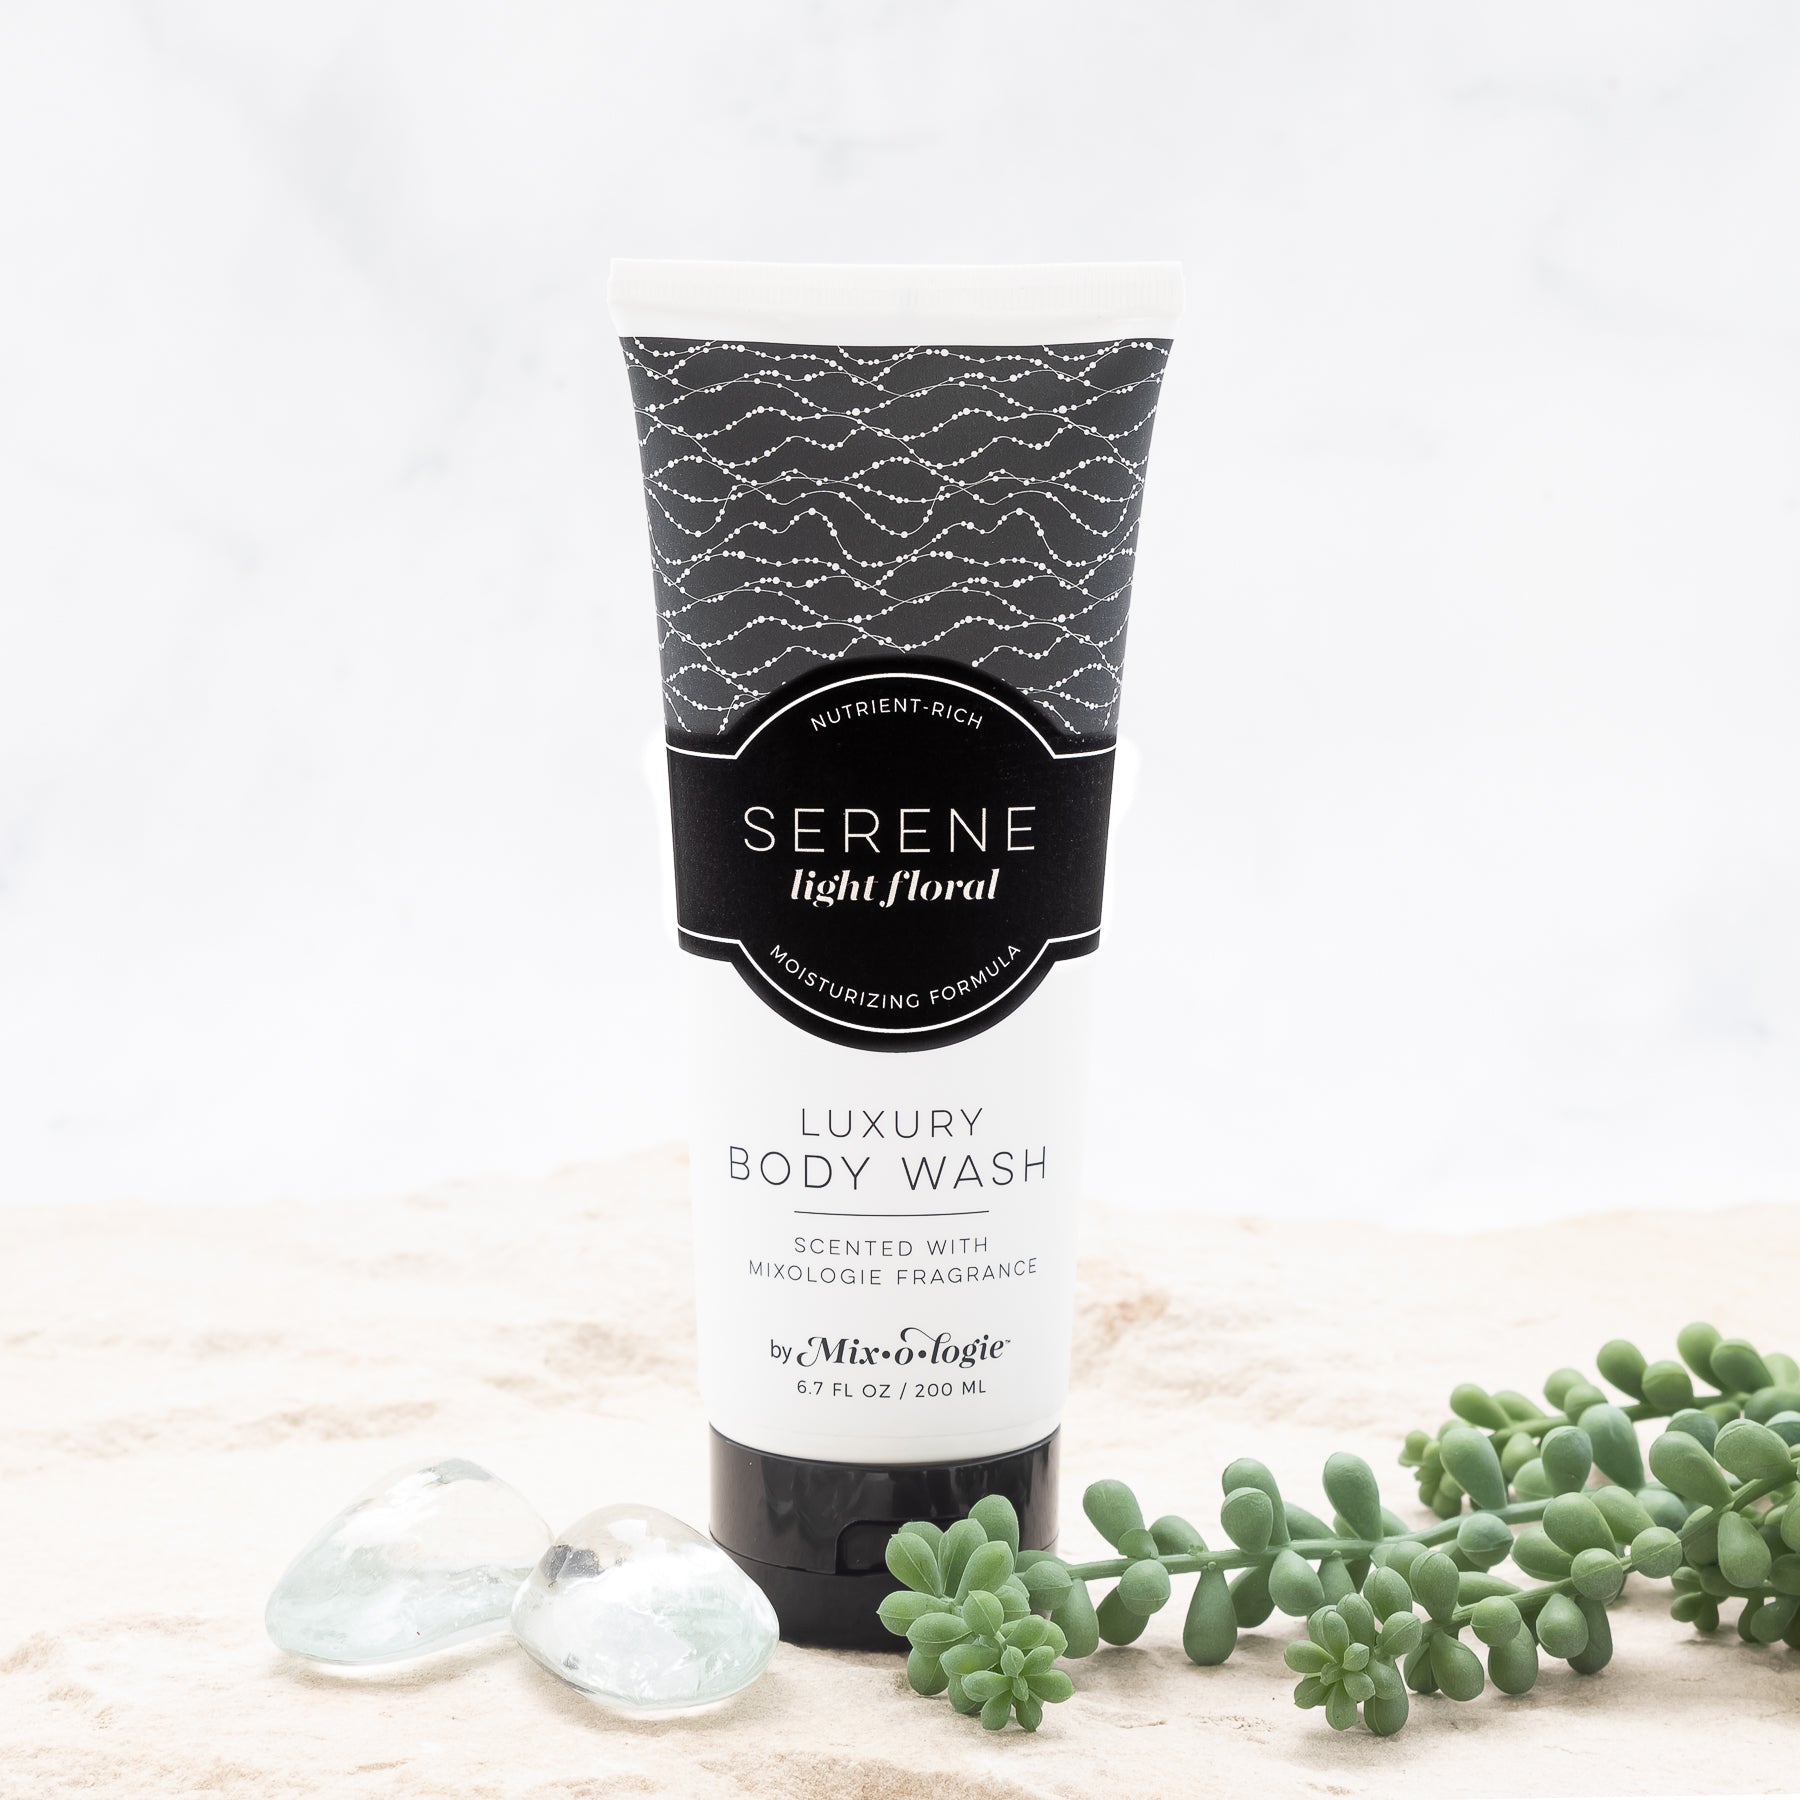 Luxury Body Wash in Serene (Light Floral) in white pattern package and black label in the sand with rocks and greenery .Contains 6.7 fl oz or 200 mL. 